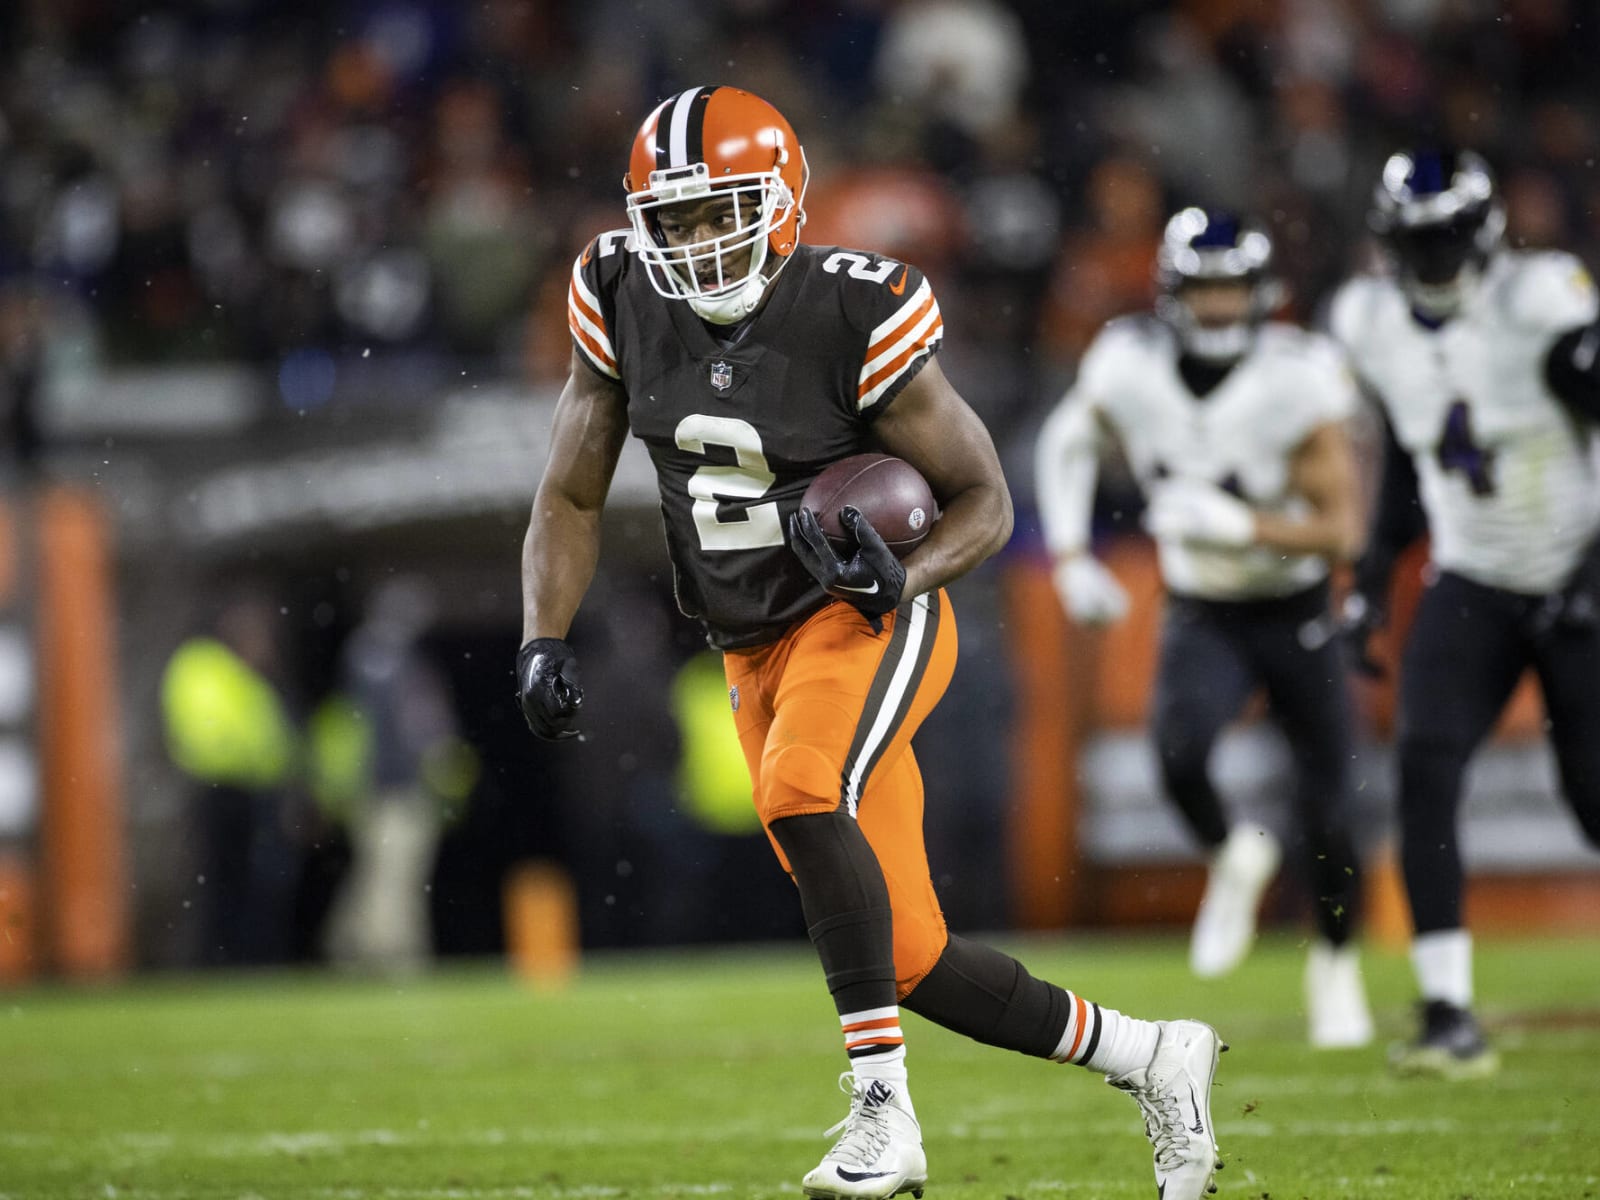 Amari Cooper Injury Update: Will the Browns' WR Play in Week 2